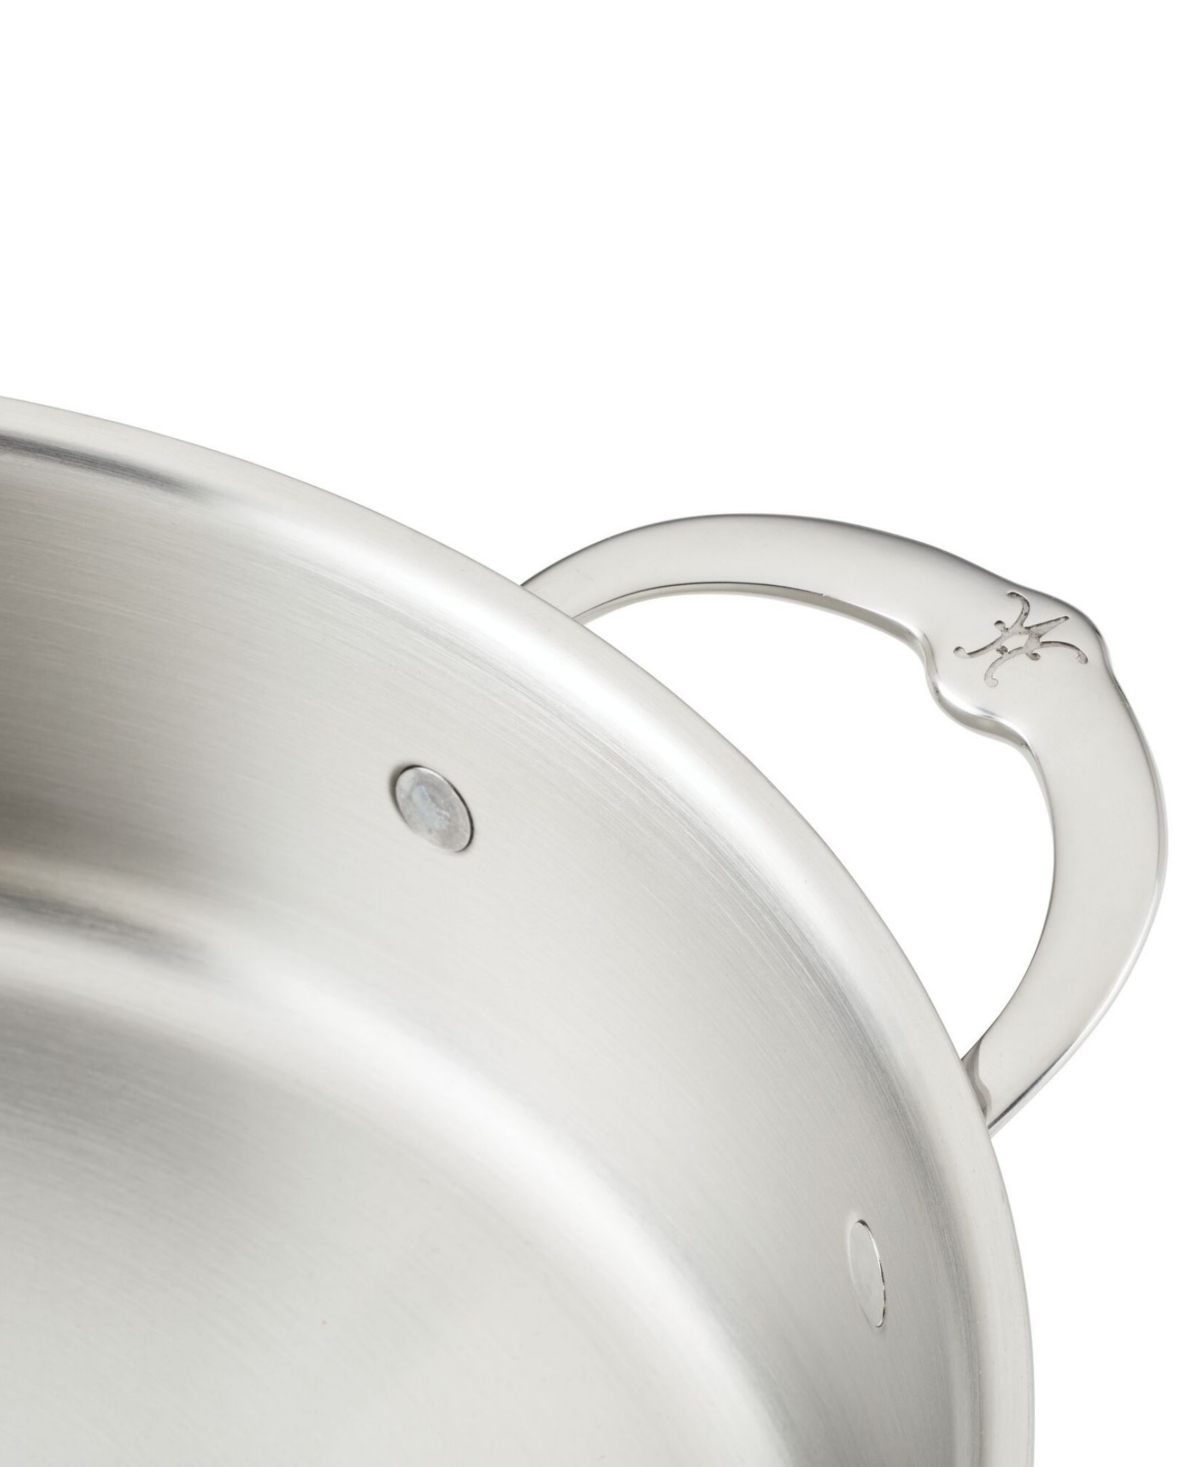 Shop Hestan Thomas Keller Insignia Commercial Clad Stainless Steel 9-quart Open Rondeau In No Color